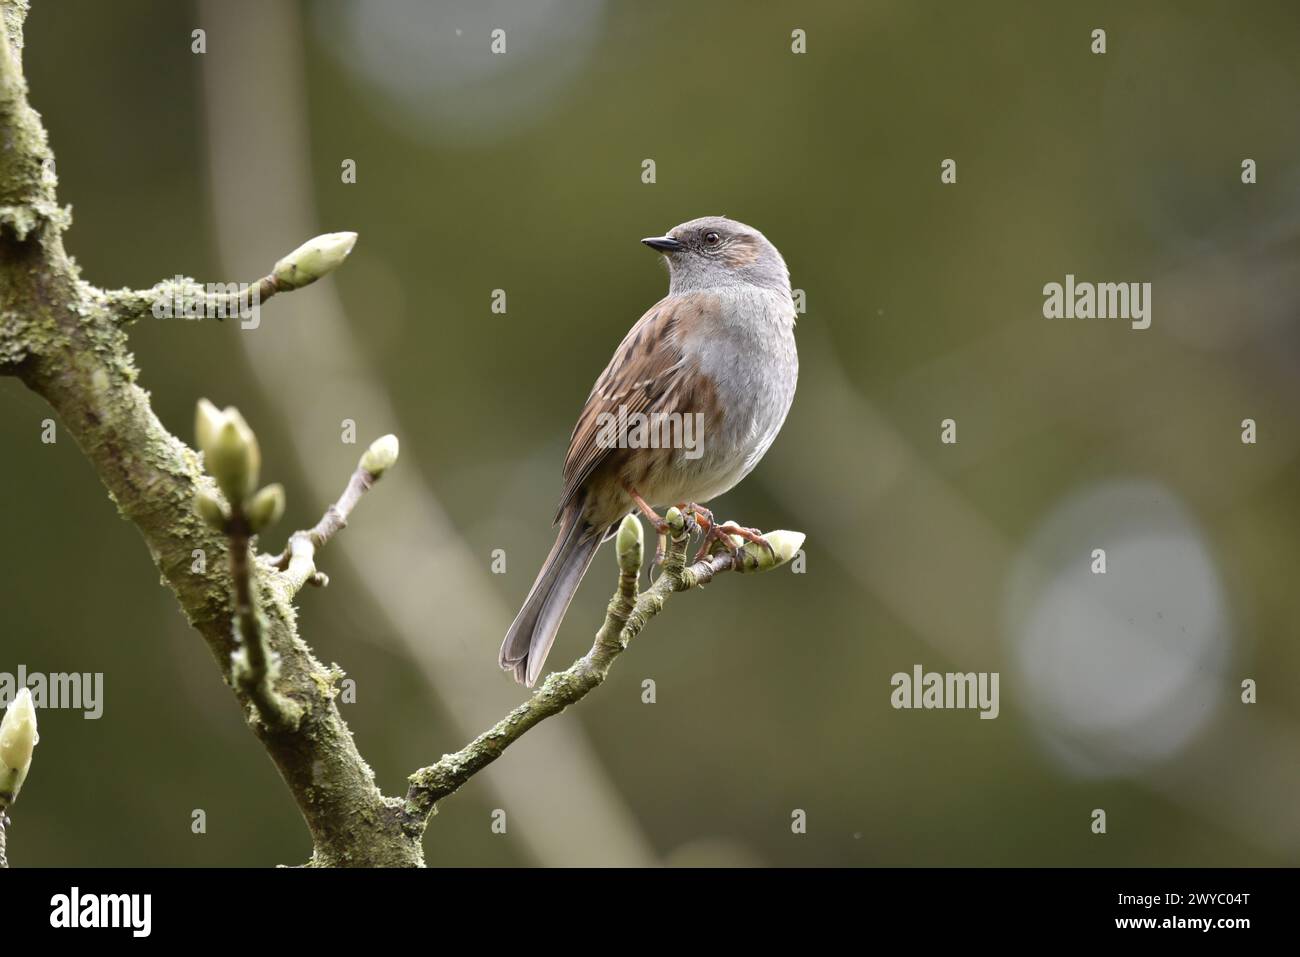 Close-Up Image of a Dunnock (Prunella modularis) Perched at the End of a Budding Twig, Centre, in Right-Profile with Head Looking Back, taken in UK Stock Photo